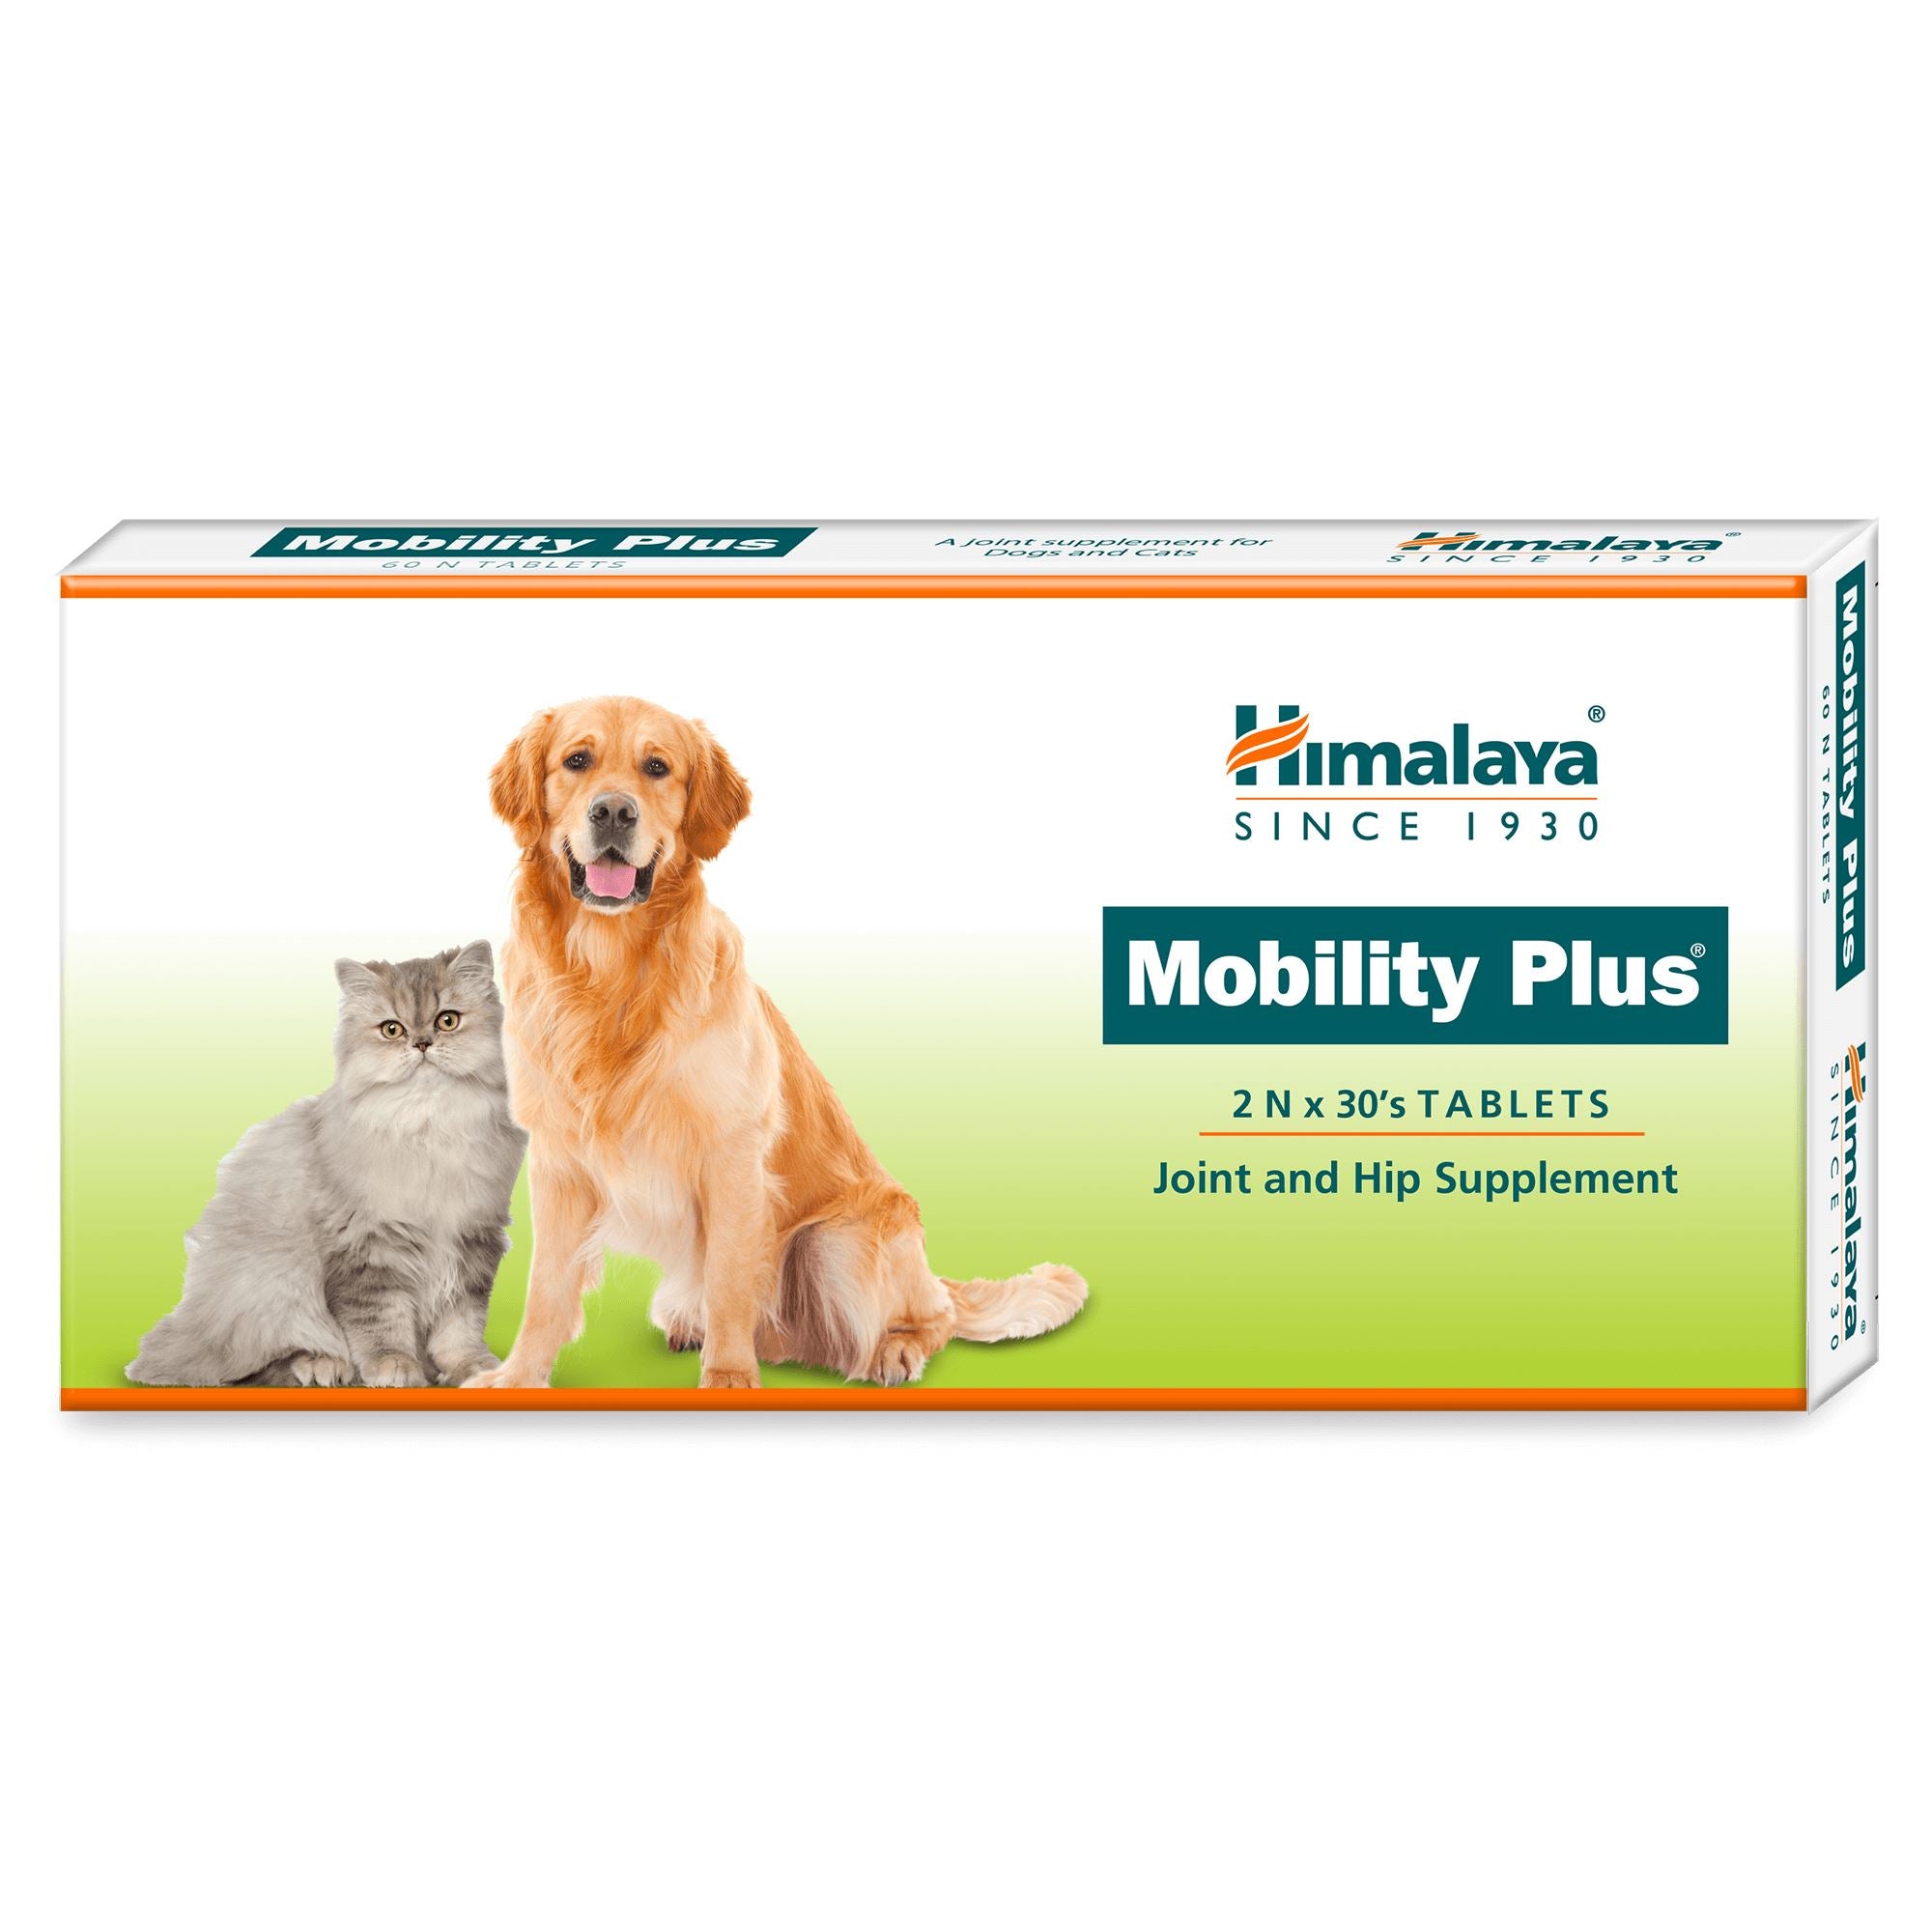 Himalaya Mobility Plus Tablets - Joint and Hip Supplement for Pets